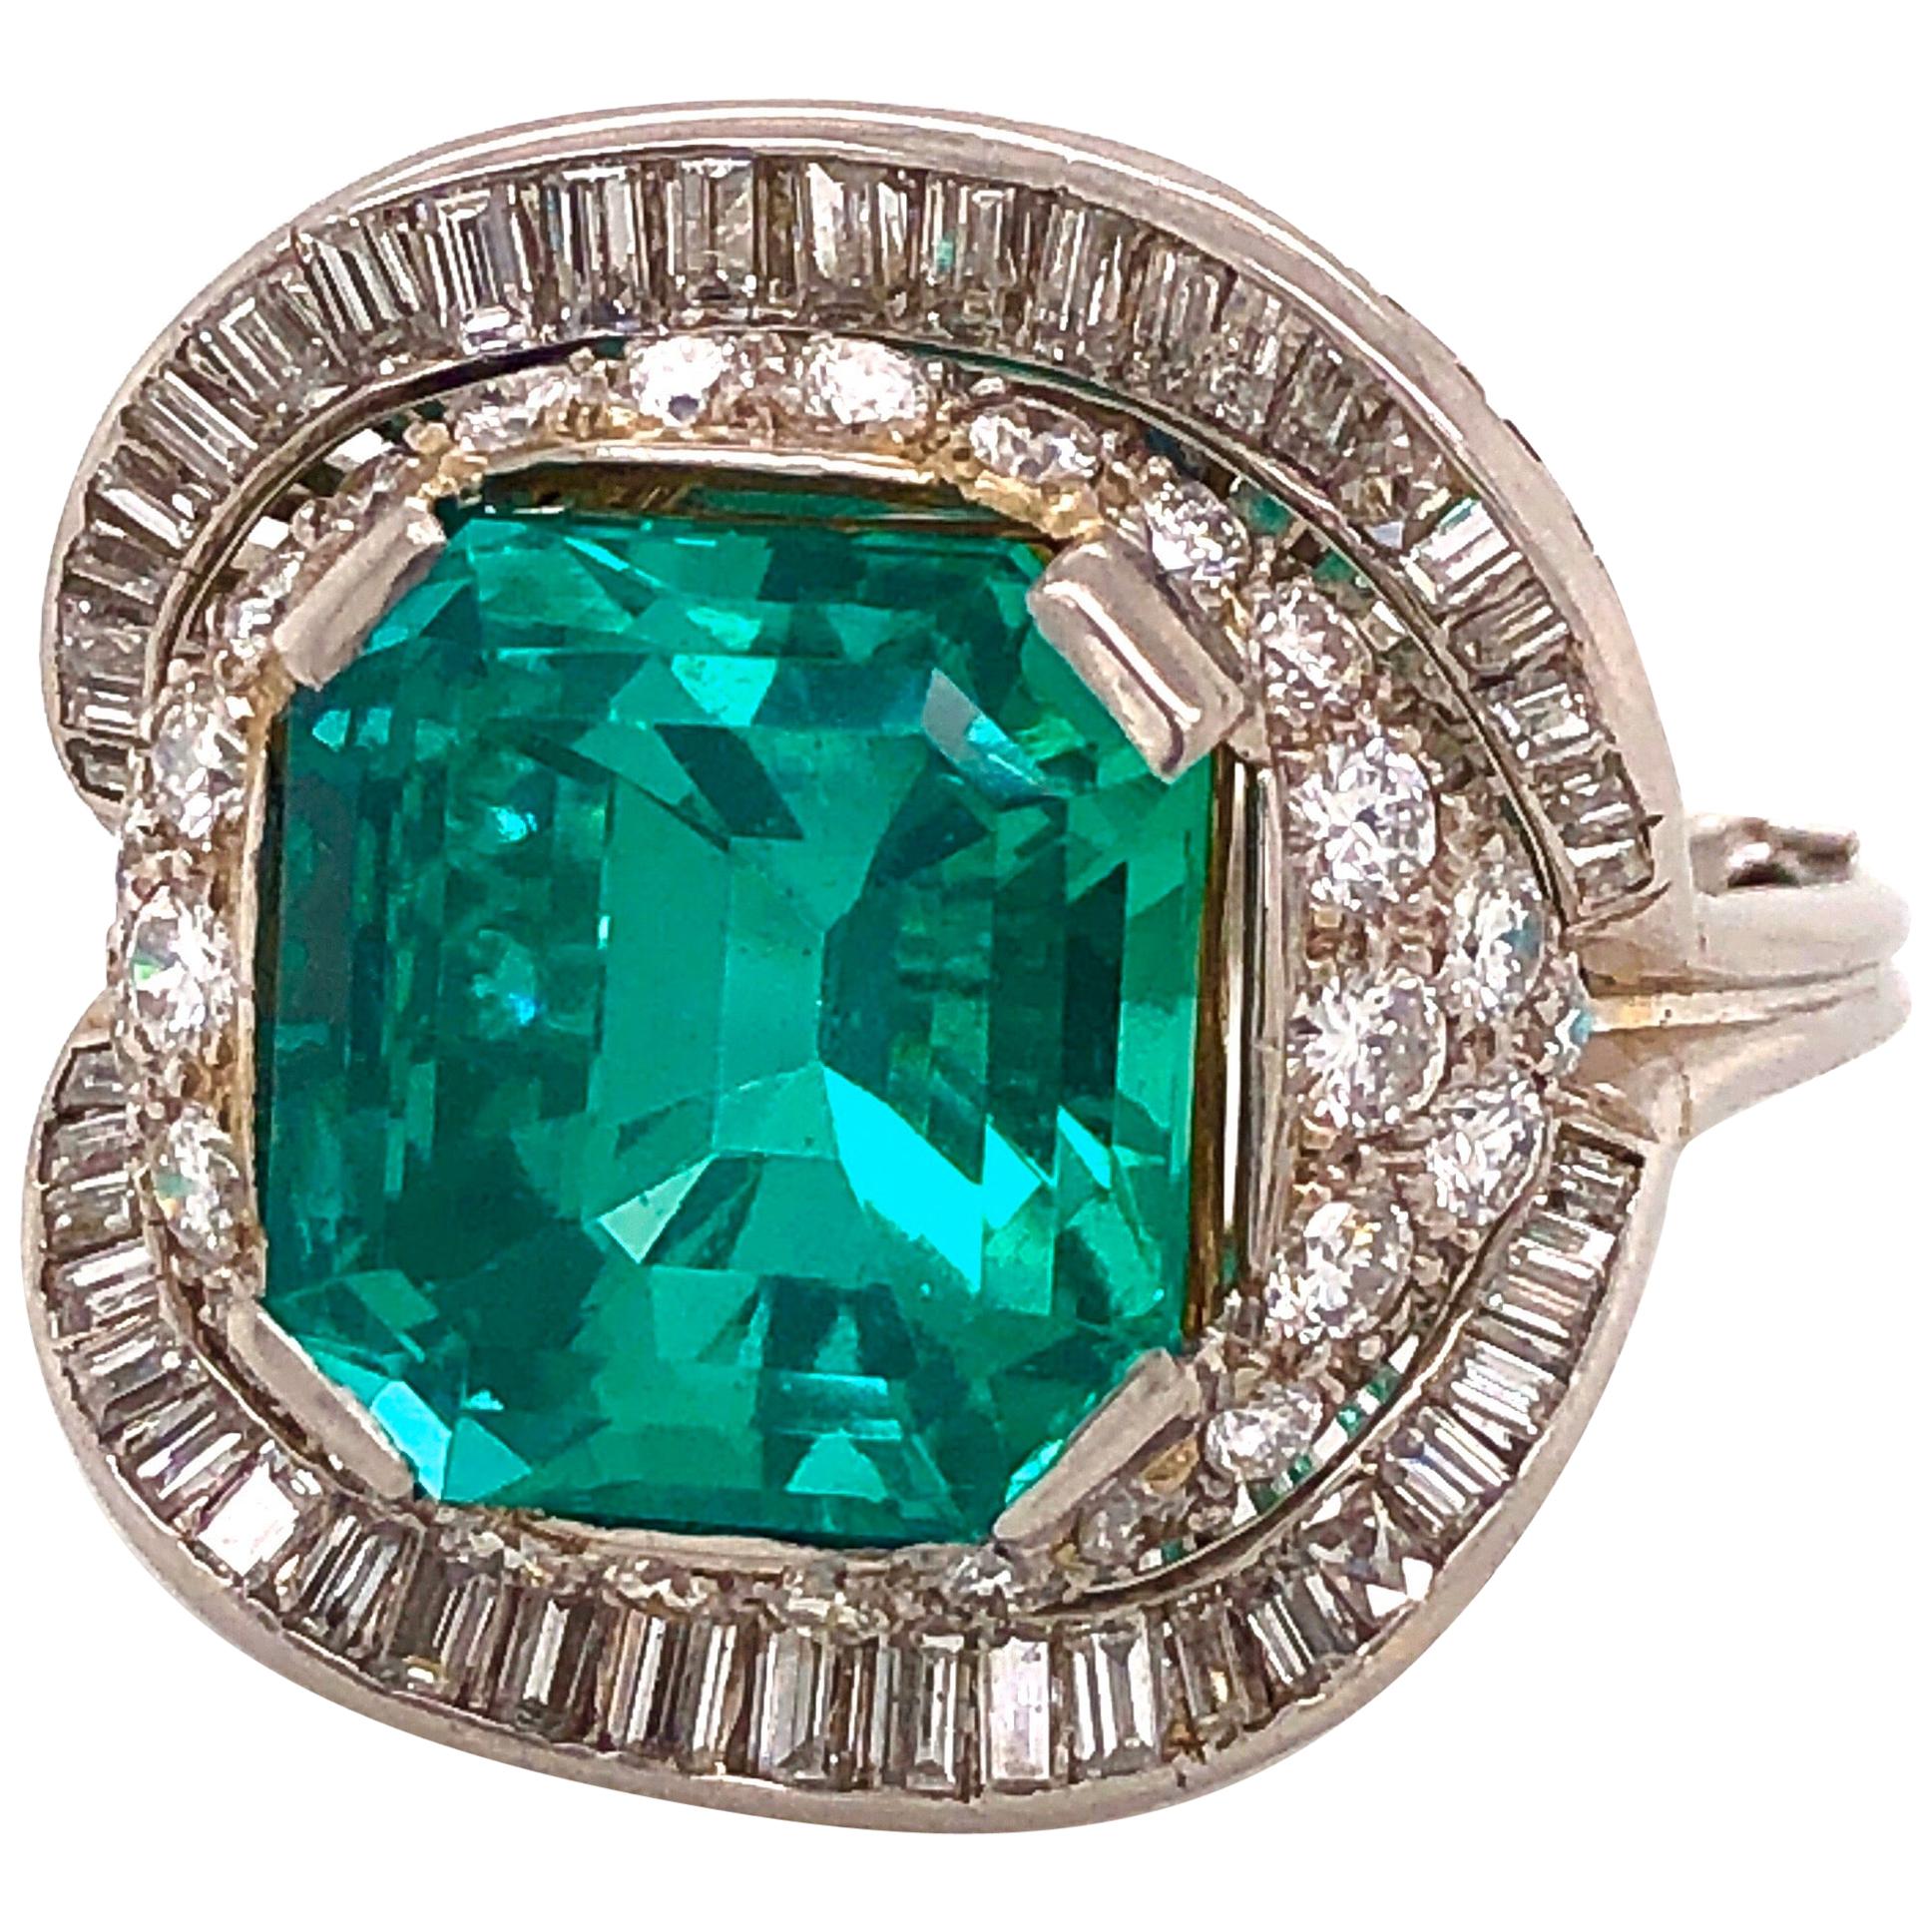 Emilio Jewelry Certified 9.08 Carat Muzo No Oil Colombian Emerald Ring For Sale